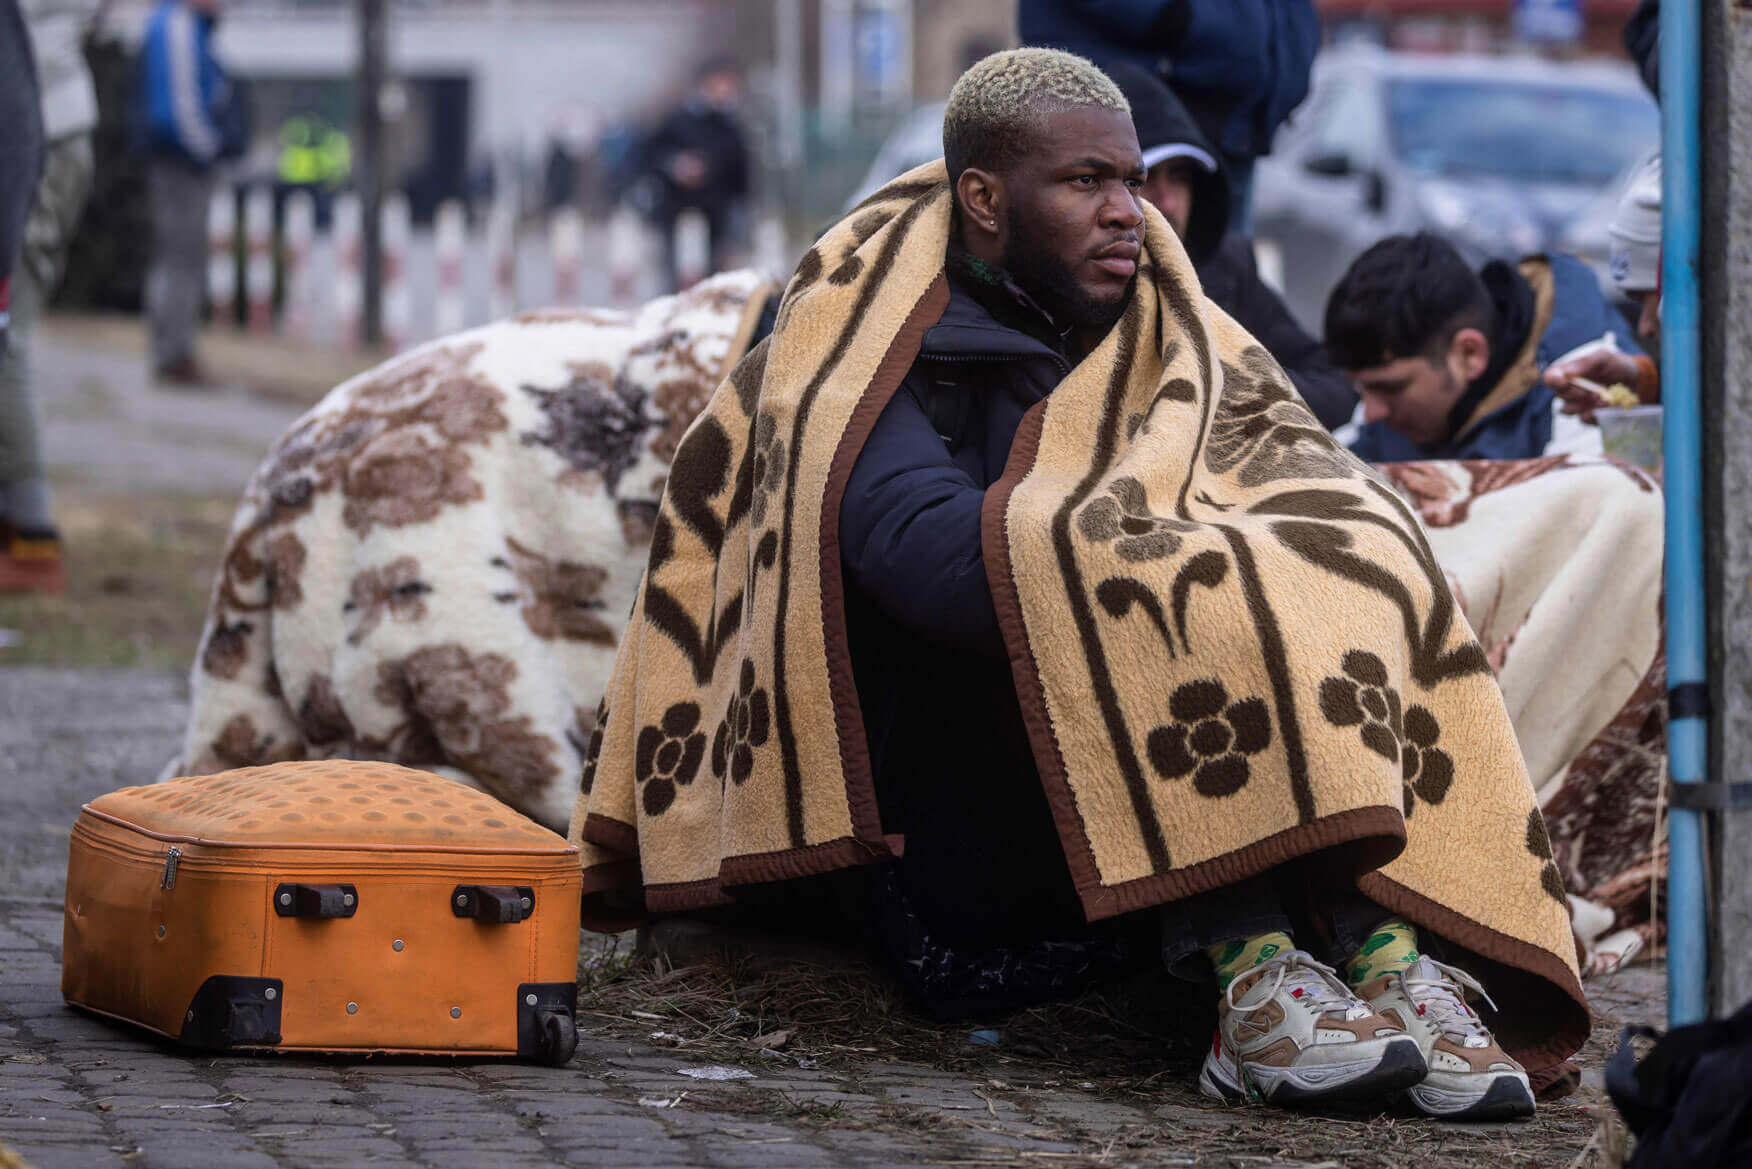 The EU’s Shocking Treatment of Non-Western Refugees Has Further Eroded Its Credibility 